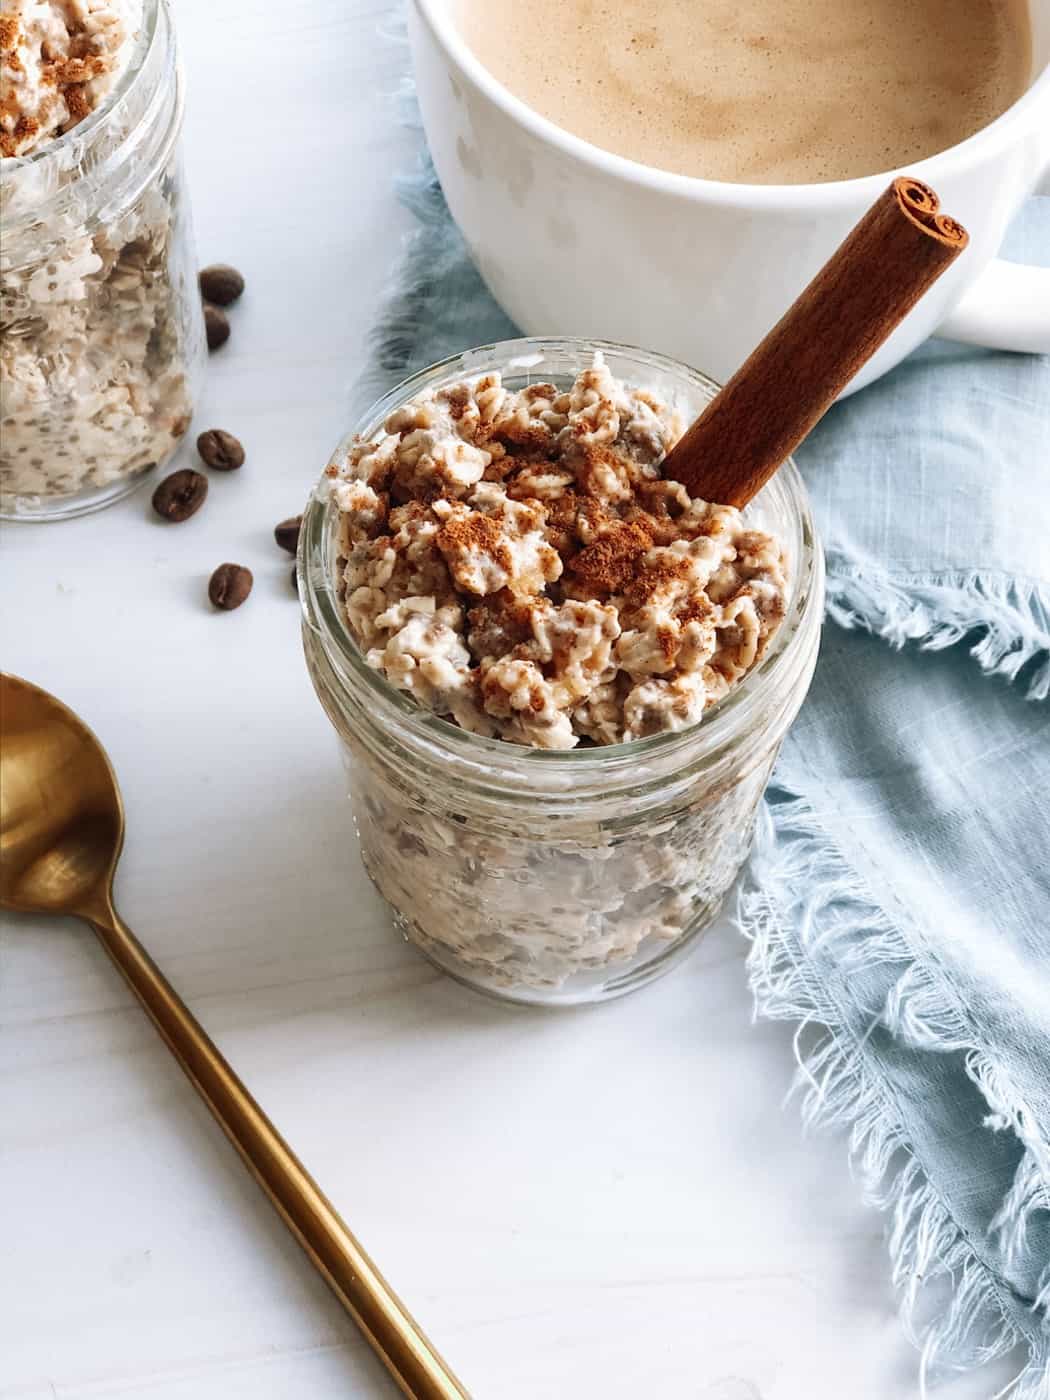 Mason jar filled with chai spiced overnight oats with stick of cinnamon and cup of coffee